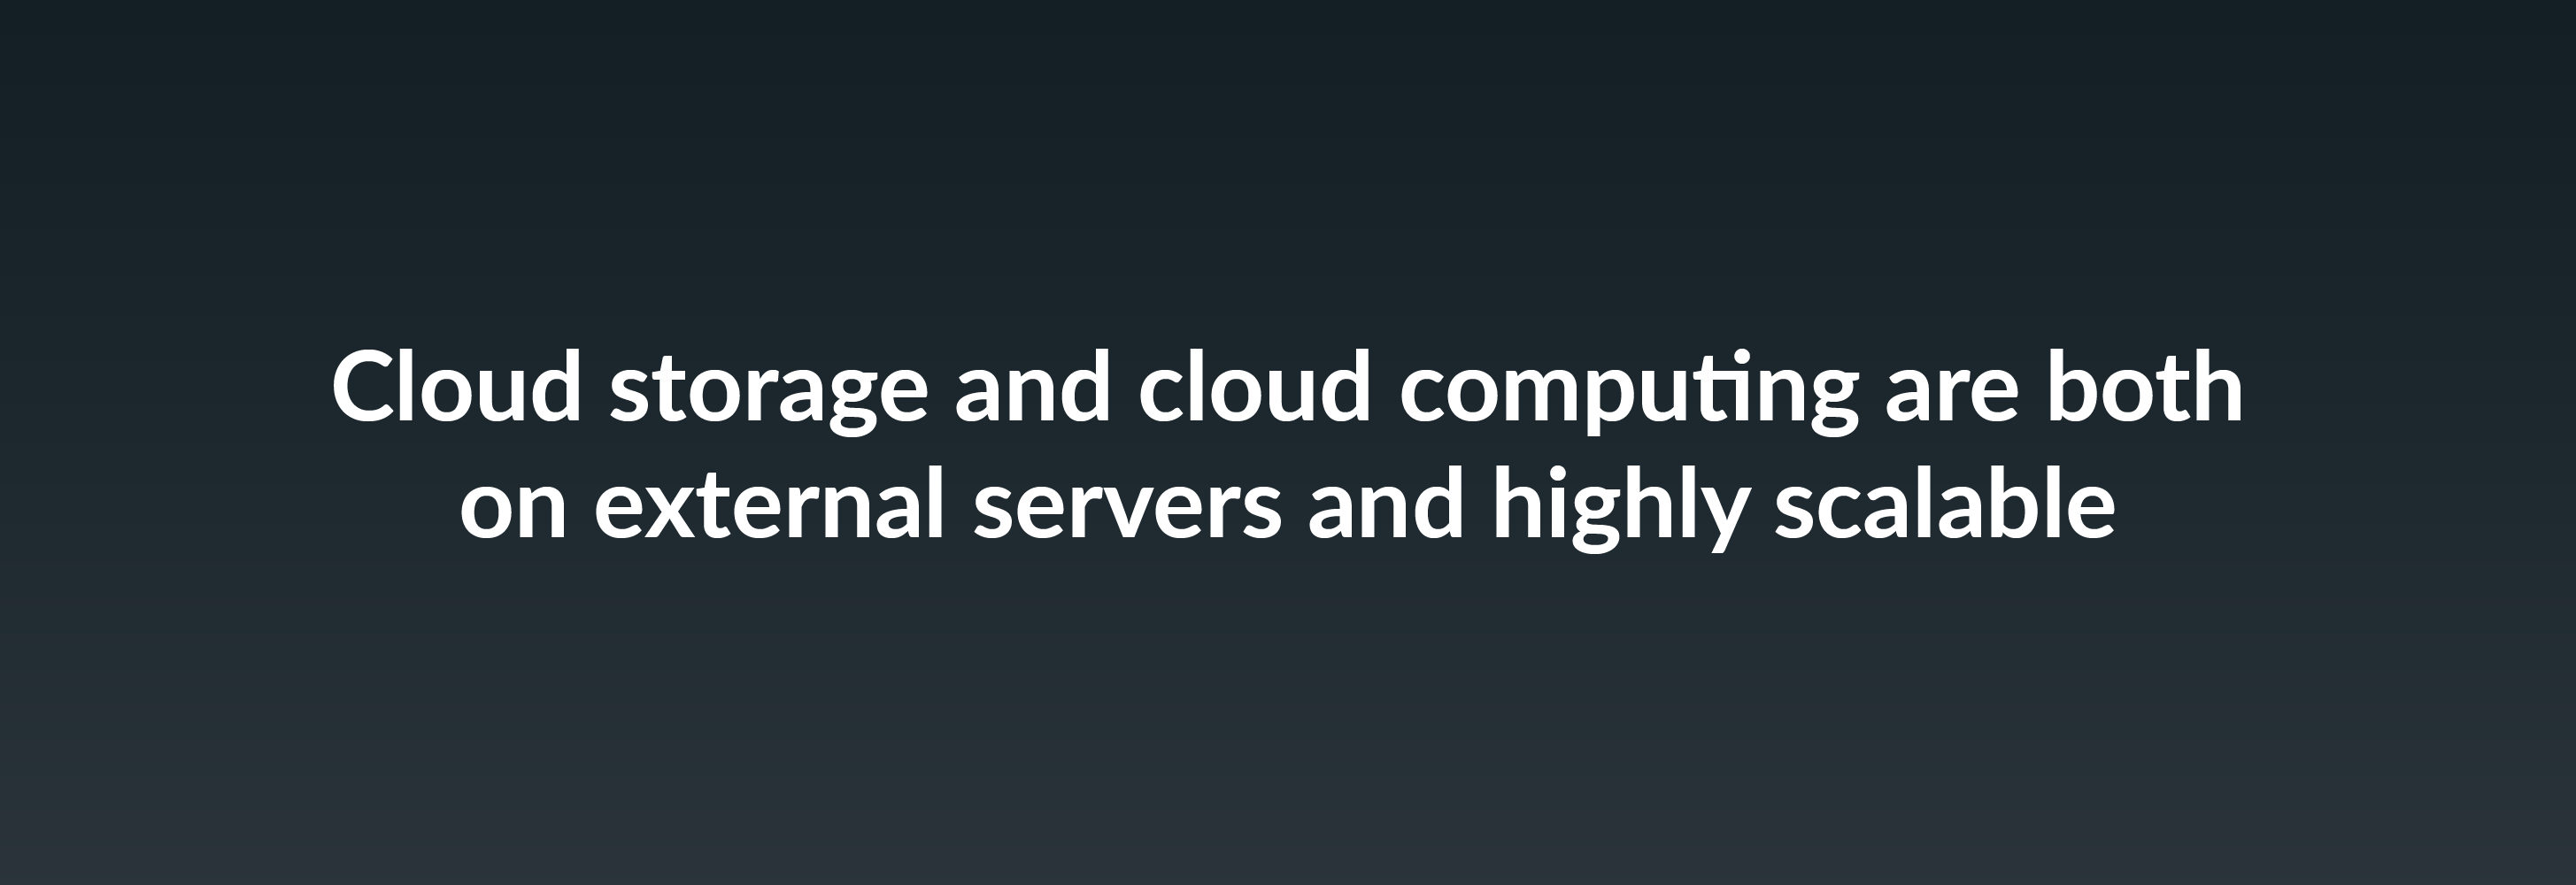 Cloud storage and cloud computing are both on external servers and highly scalable